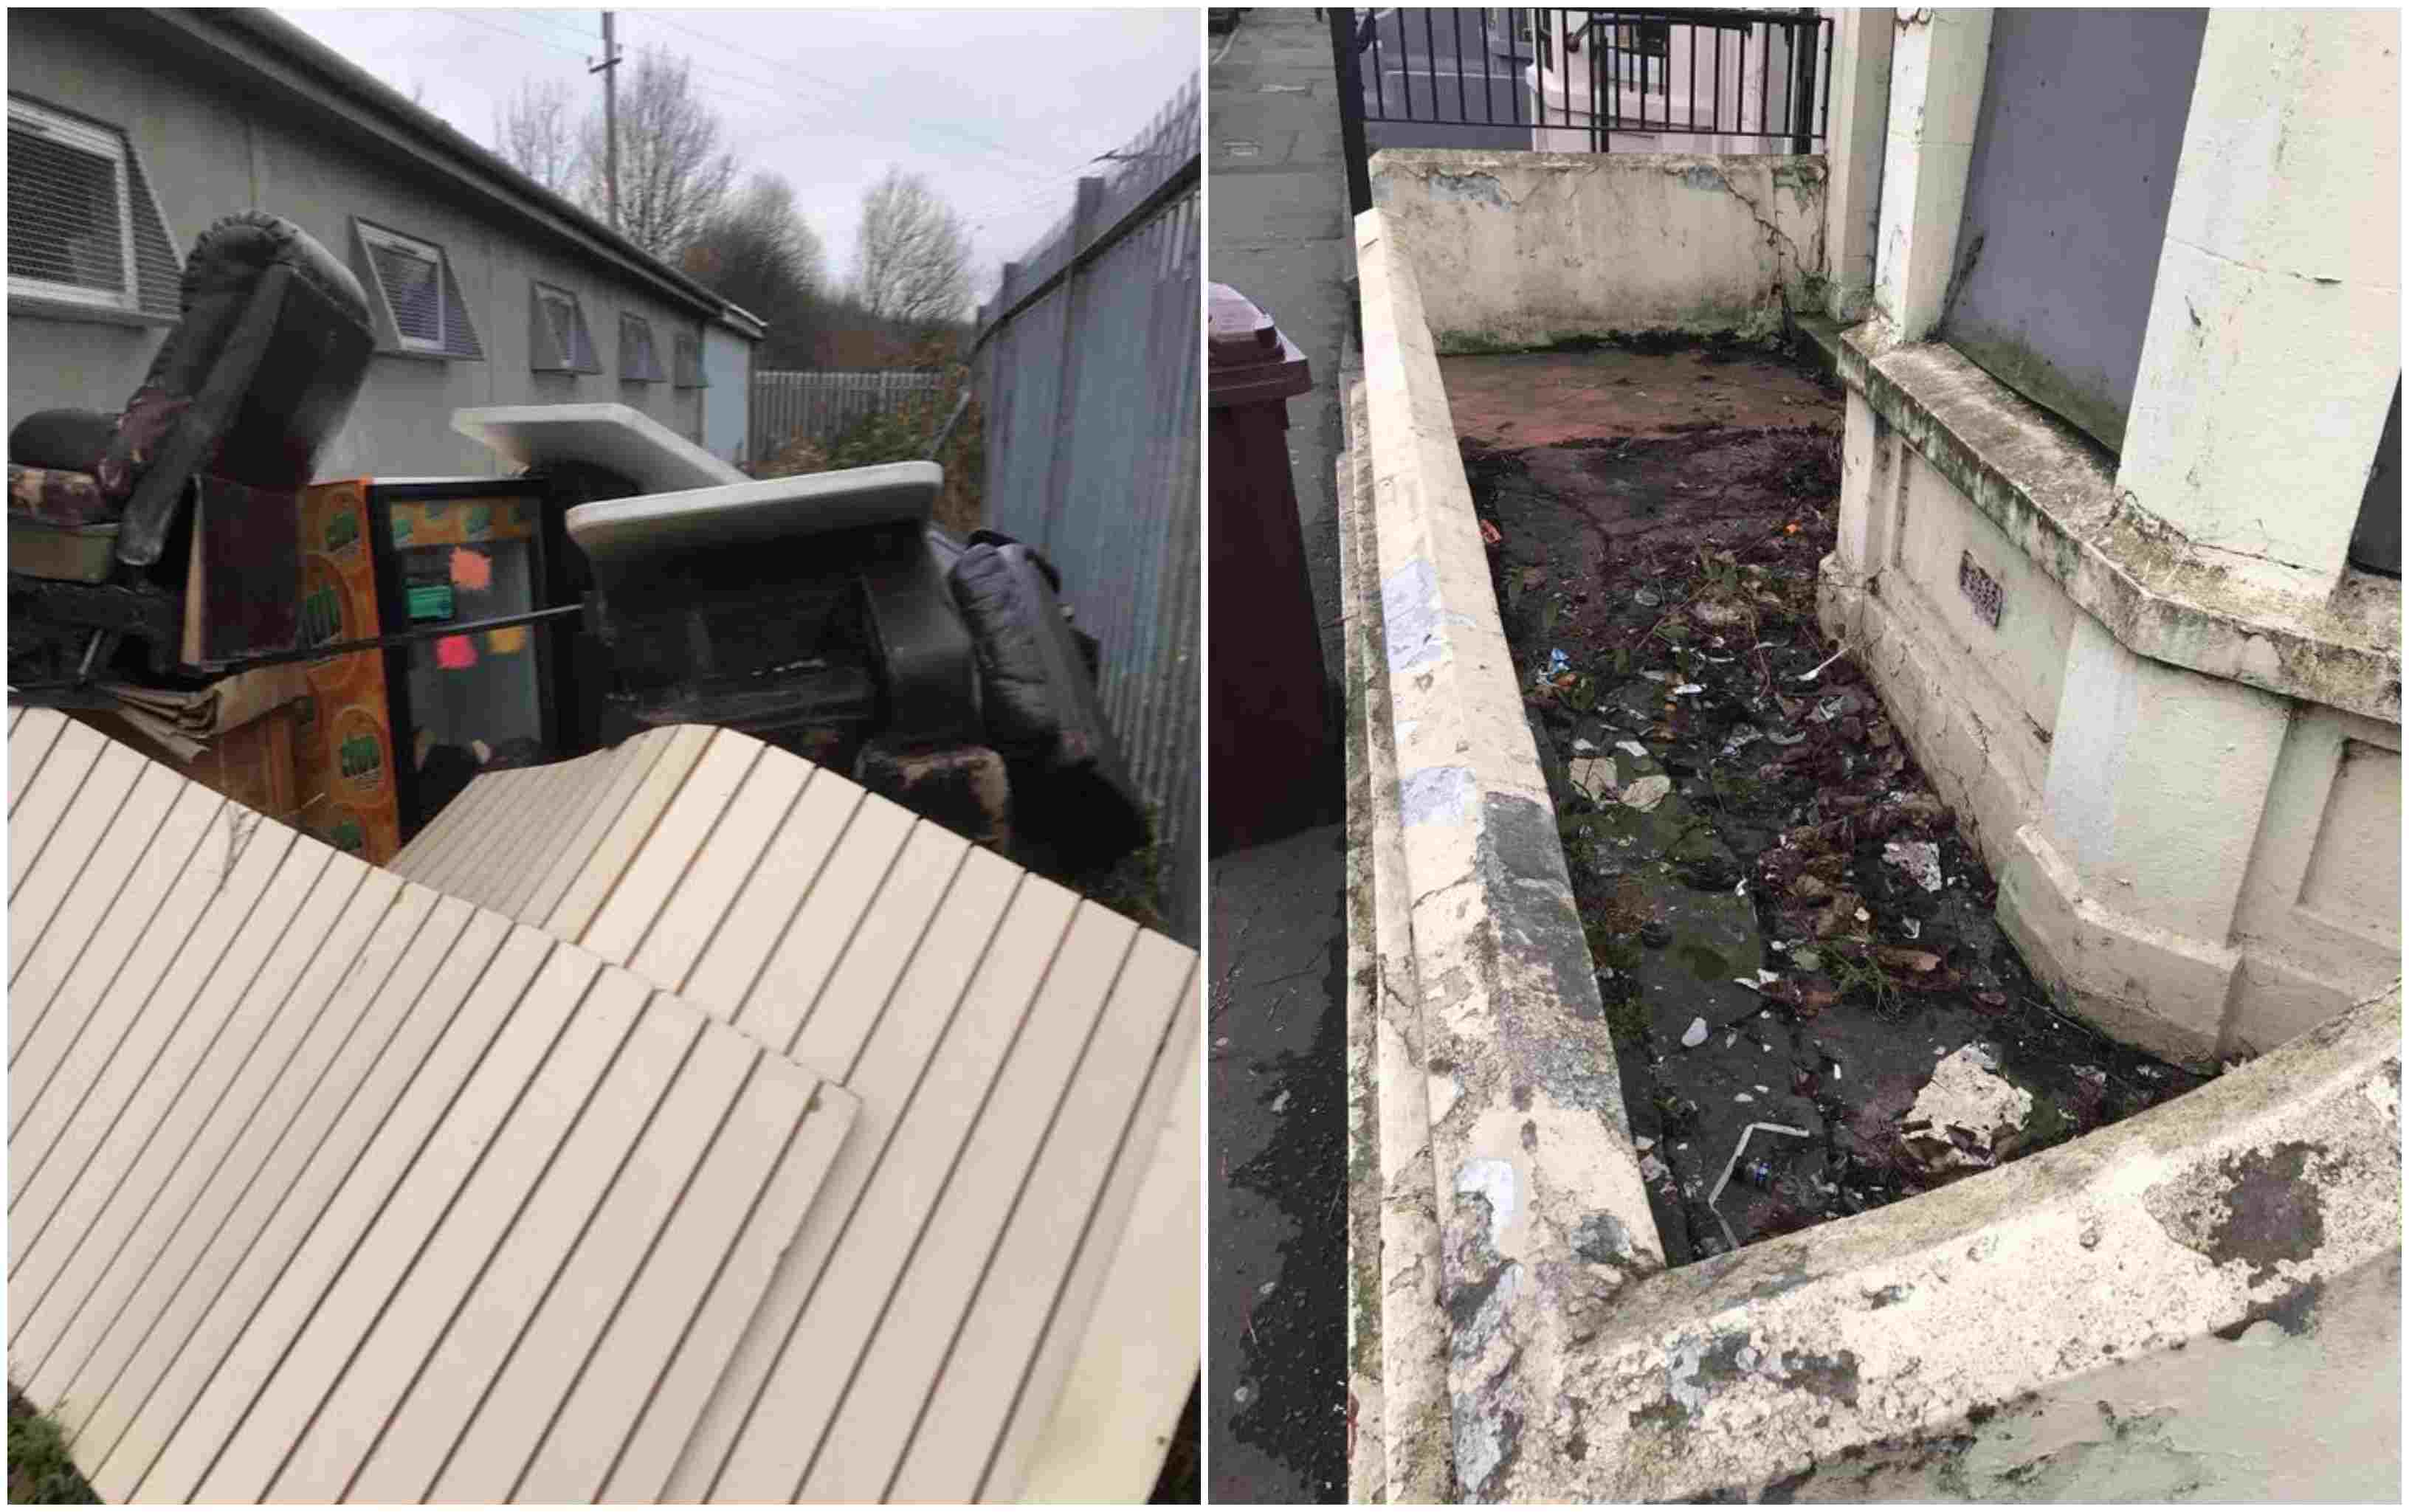 Newry city fly-tipping